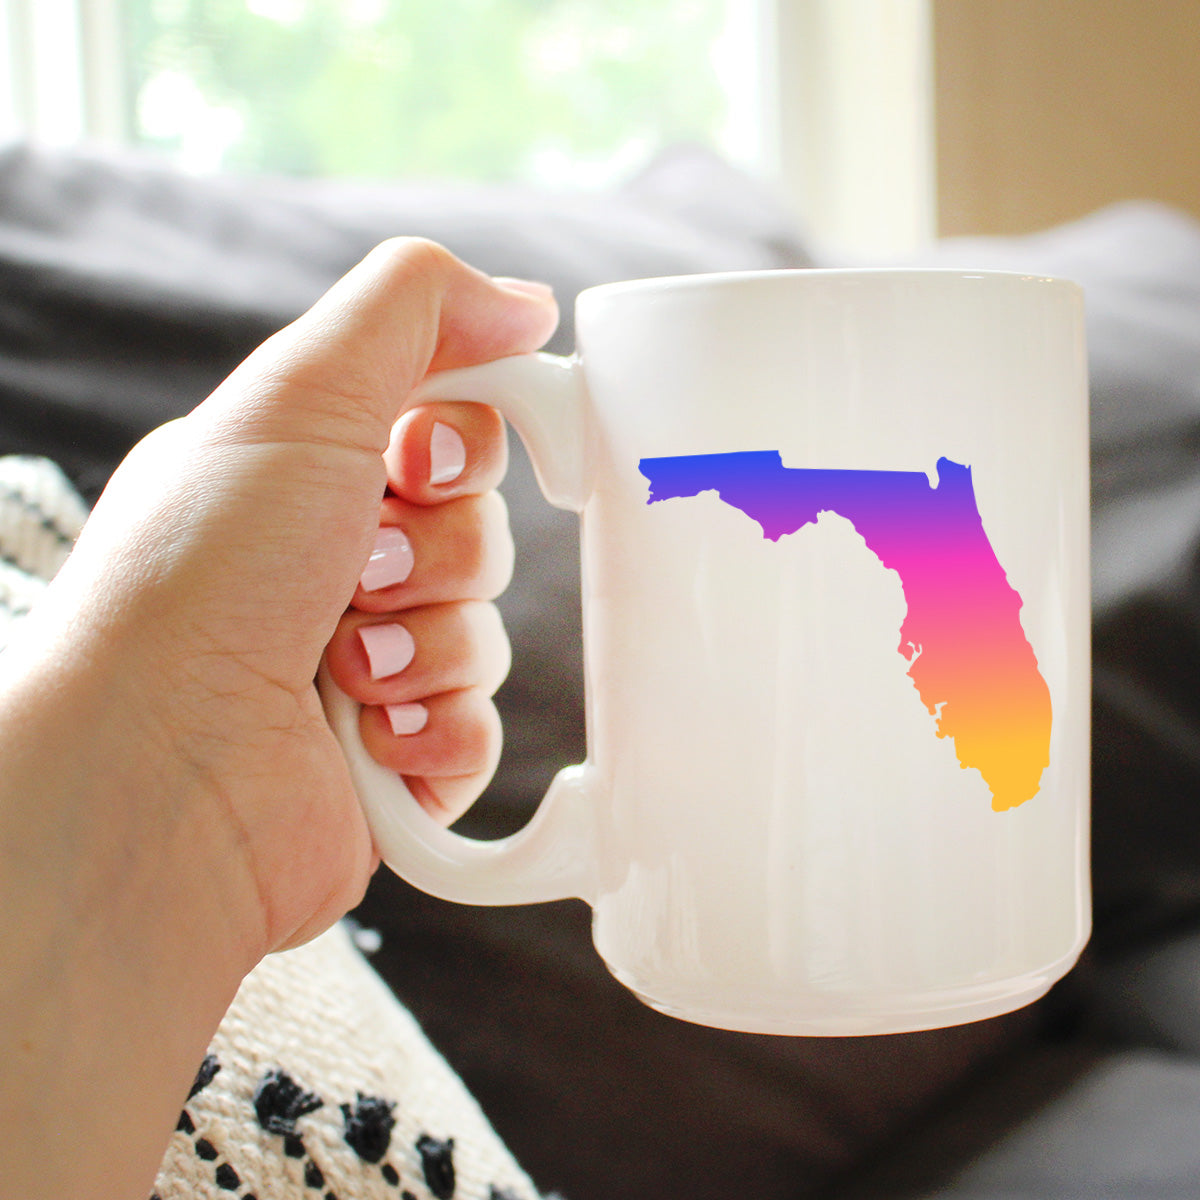 Florida State Outline Coffee Mug - State Themed Drinking Decor and Gifts for Floridian Women &amp; Men